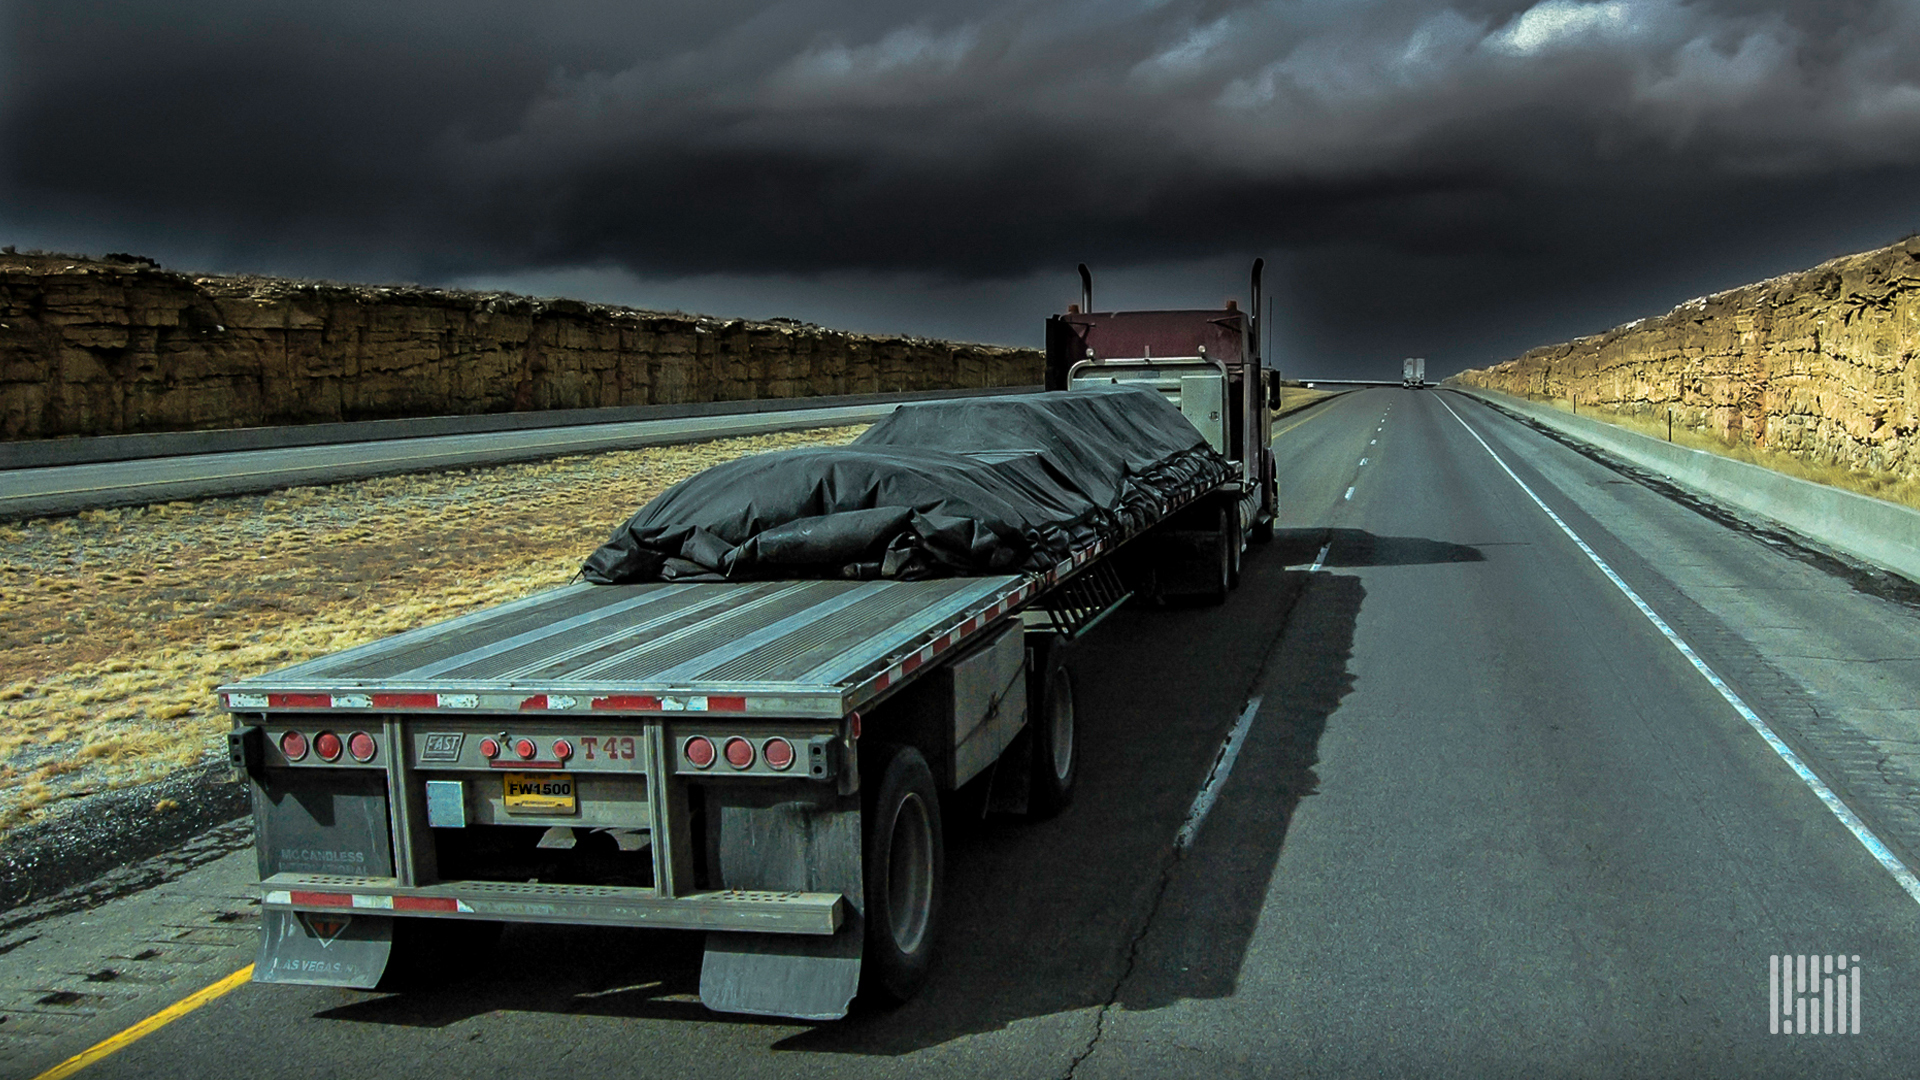 Flatbed tractor-trailer heading down highway with dark thunderstorm cloud across the sky.